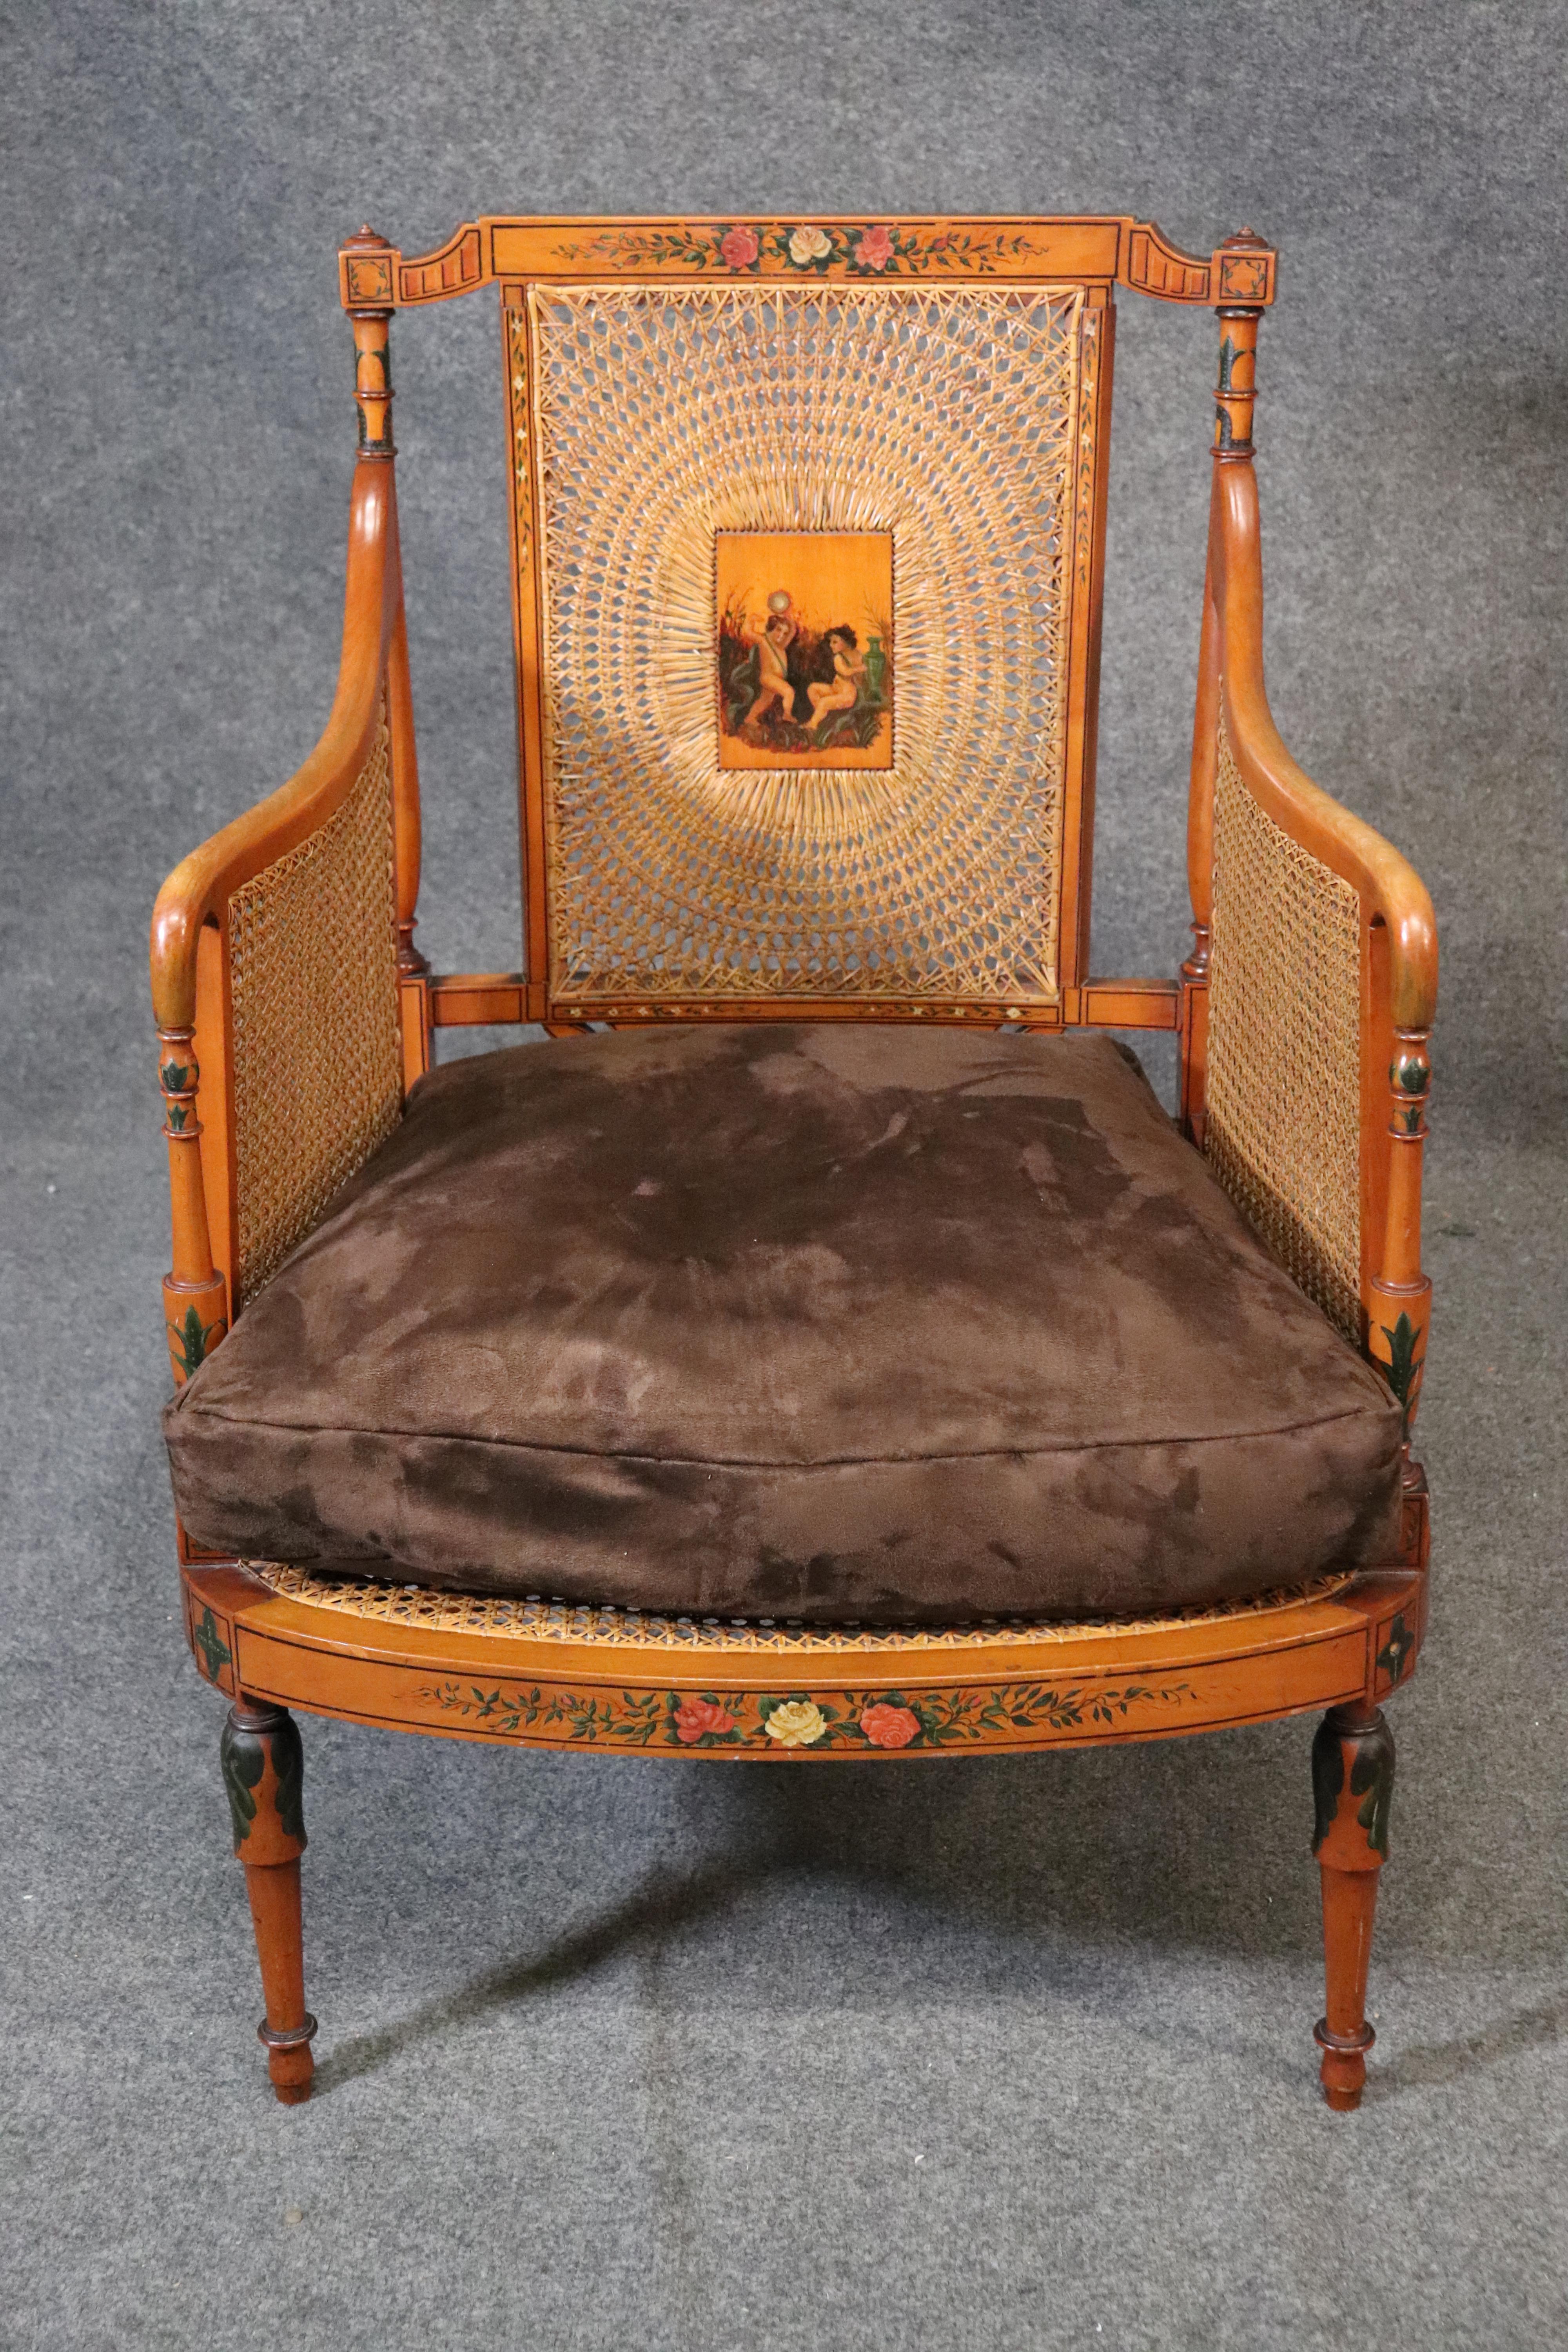 This is a gorgeous Satinwood English cane armchair or bergere chair. The chair is in good original condition with no damage to the caned surfaces that I can find. The chair has hand painted scenery and is just gorgeous. Dates to the 1850s and